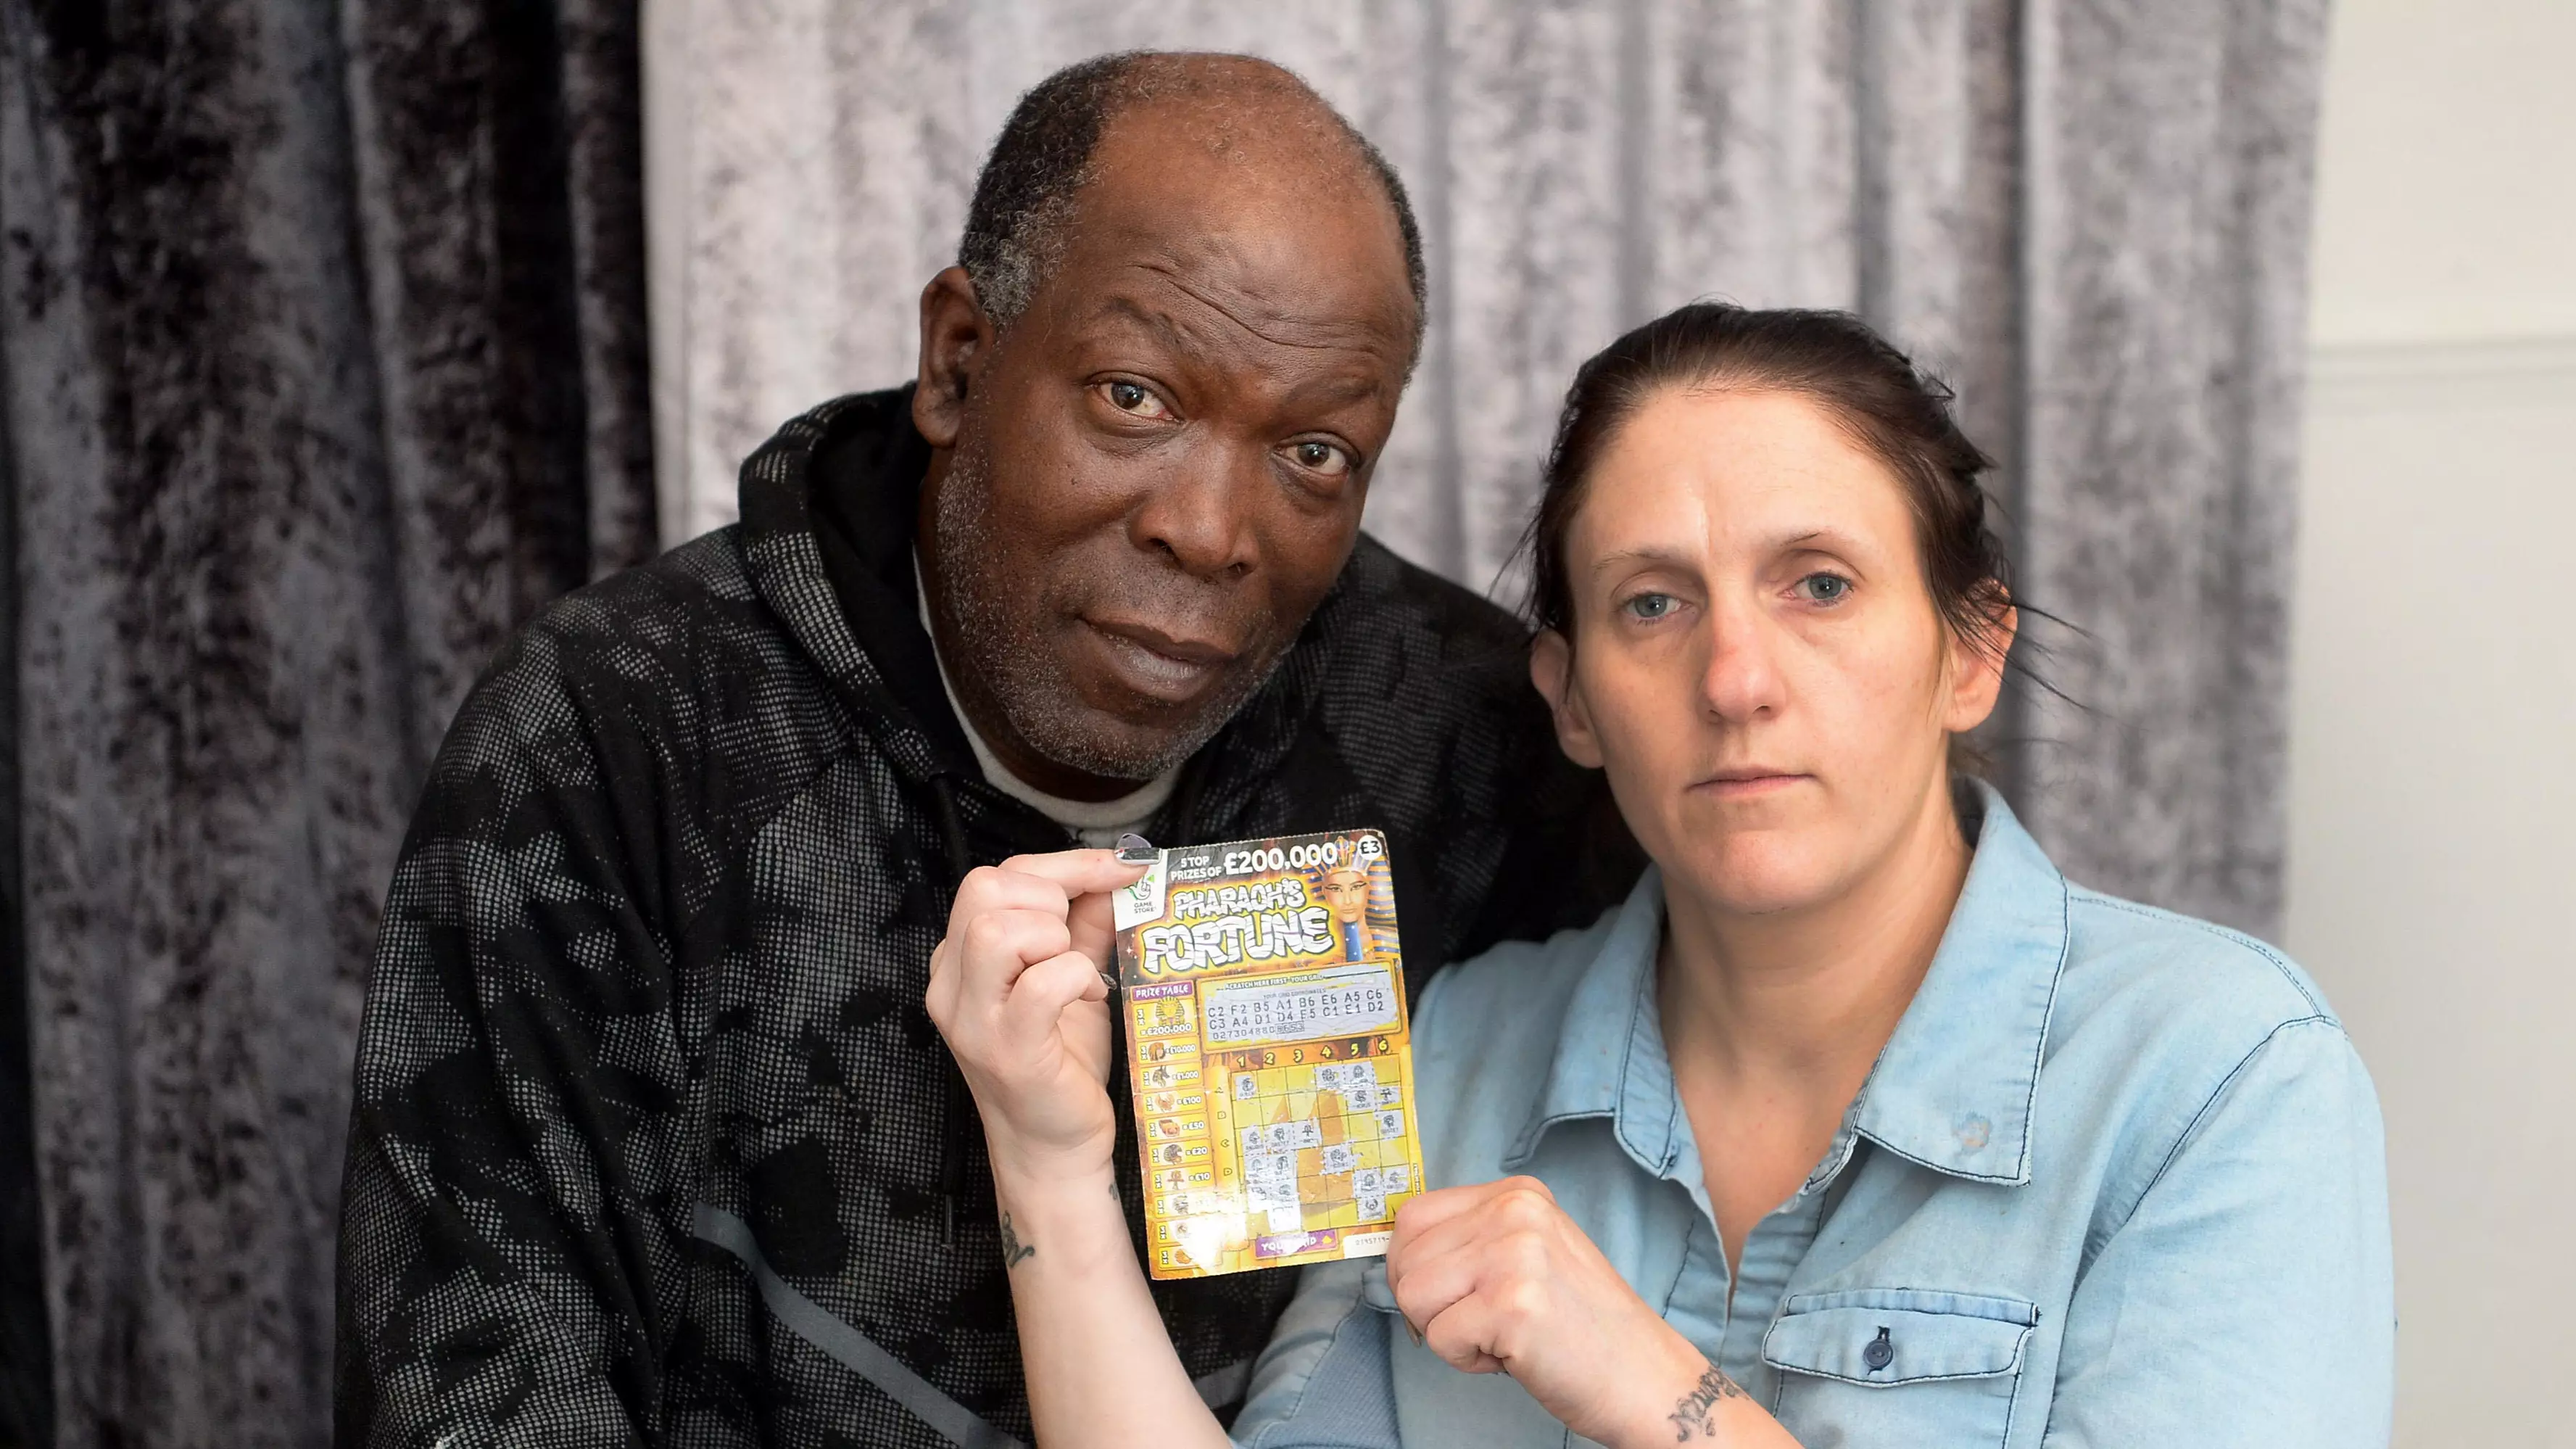 Dad Denied £200,000 Scratchcard Win Insists He Didn't Change 'F' To An 'E' 